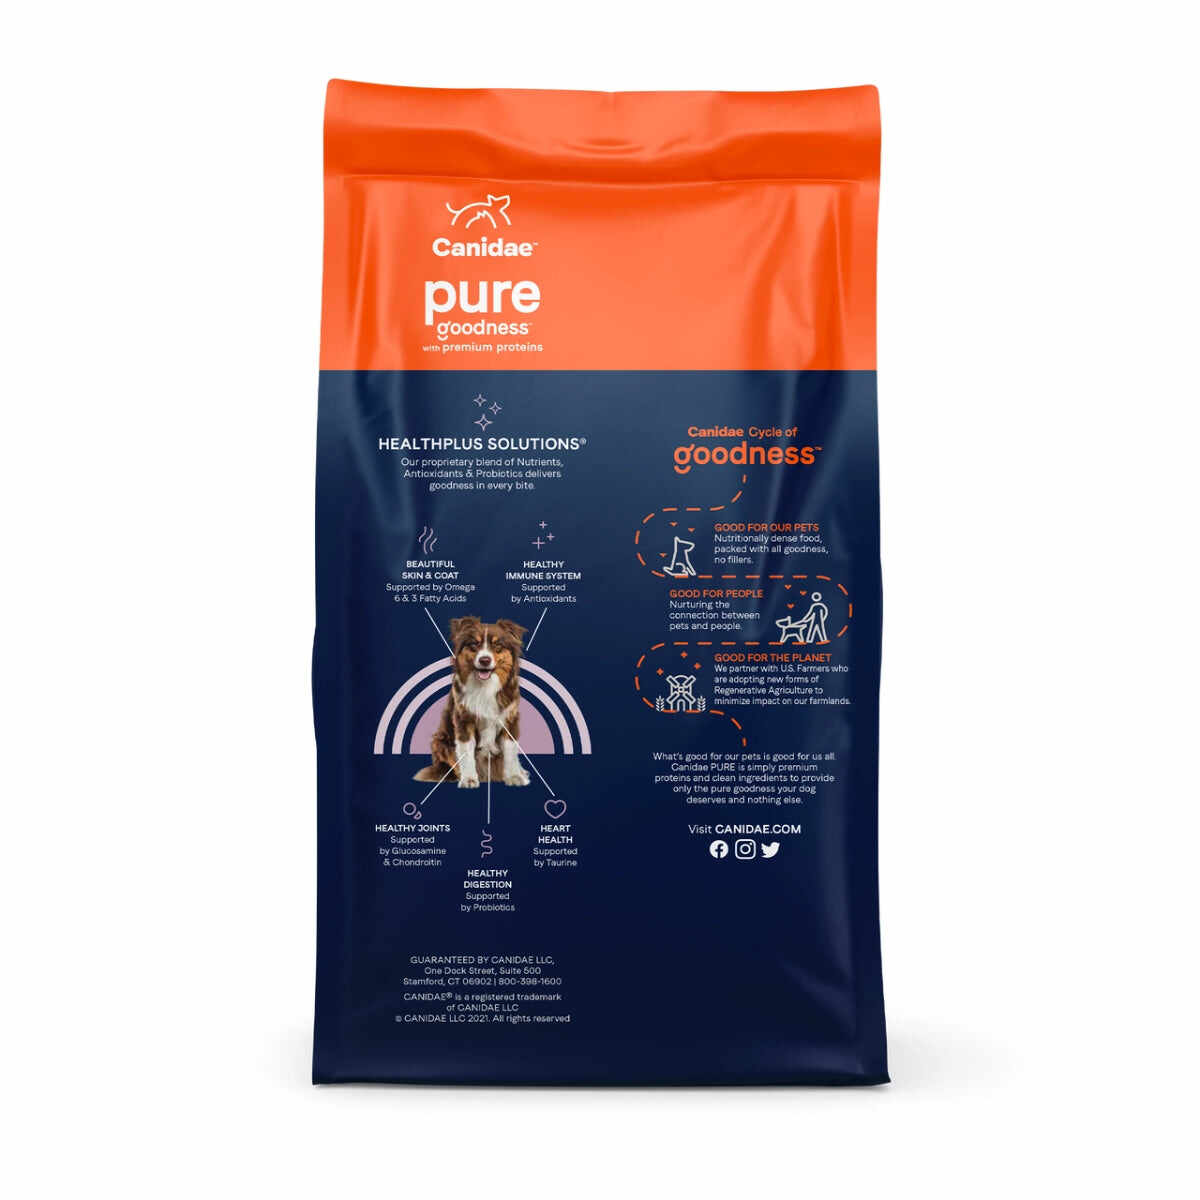 Canidae PURE Grain Free Dry Dog Food - Bison, Lentil & Carrot